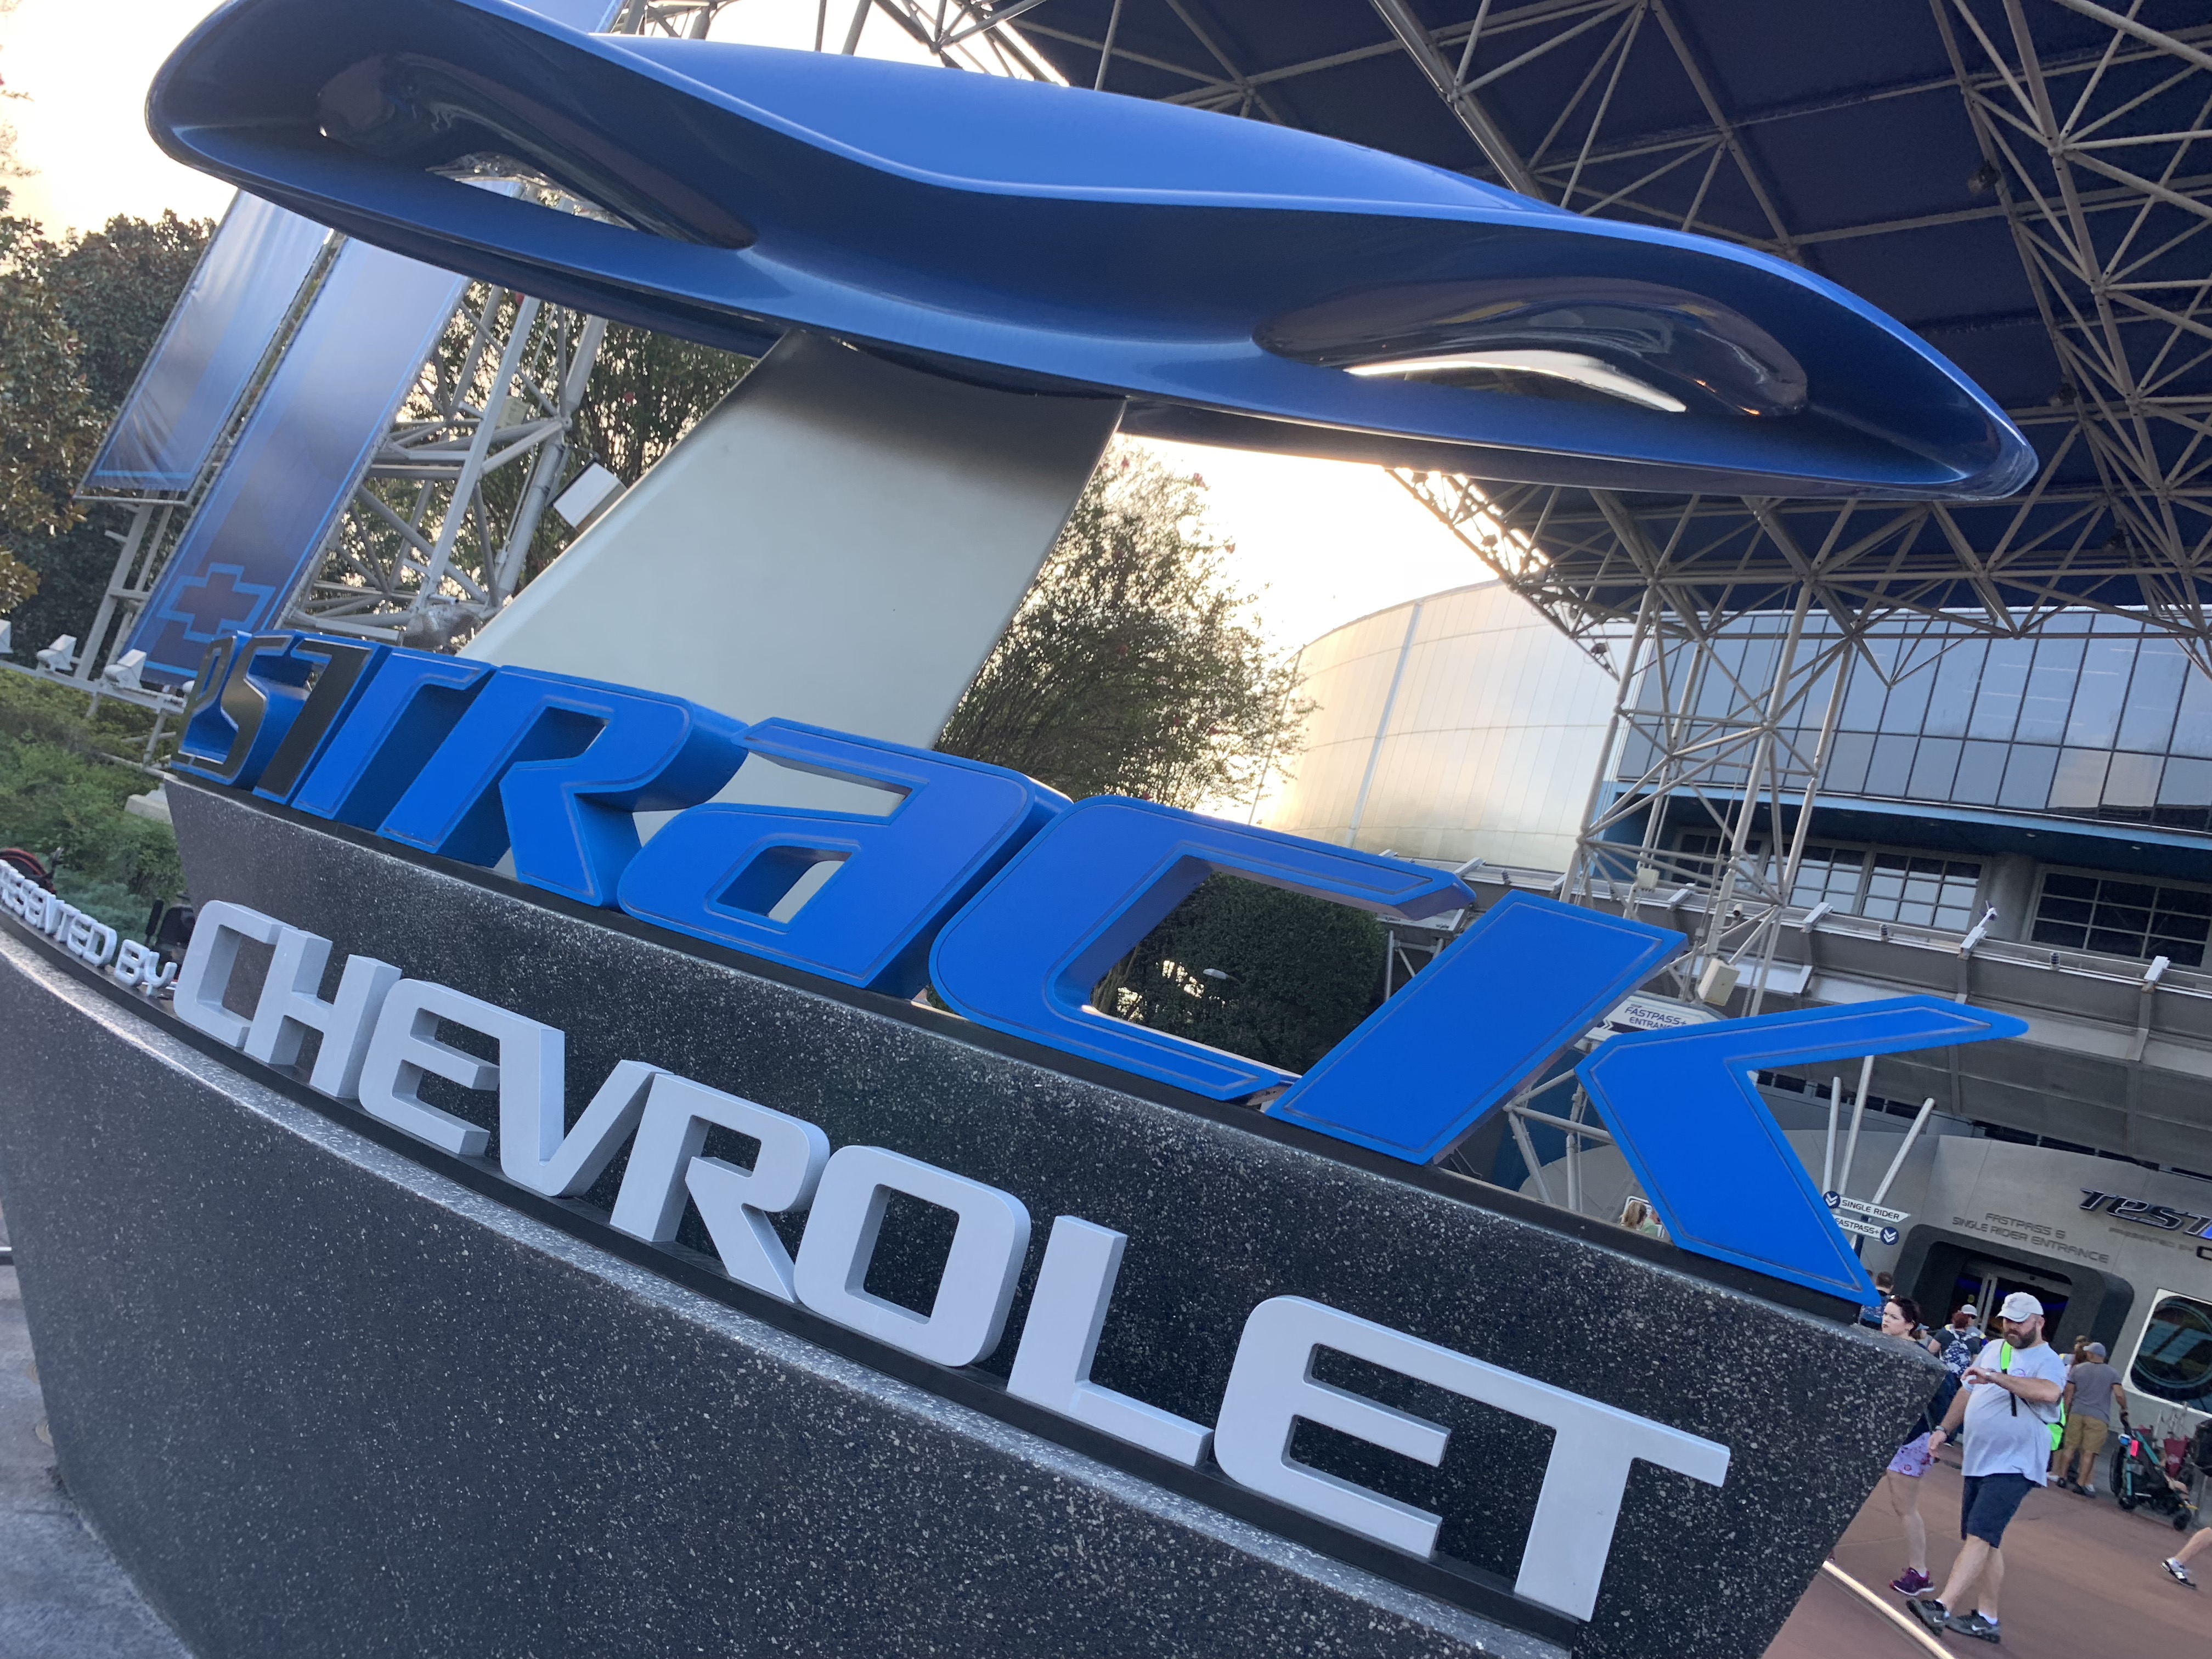 Need for Speed? Check out EPCOT's Test Track